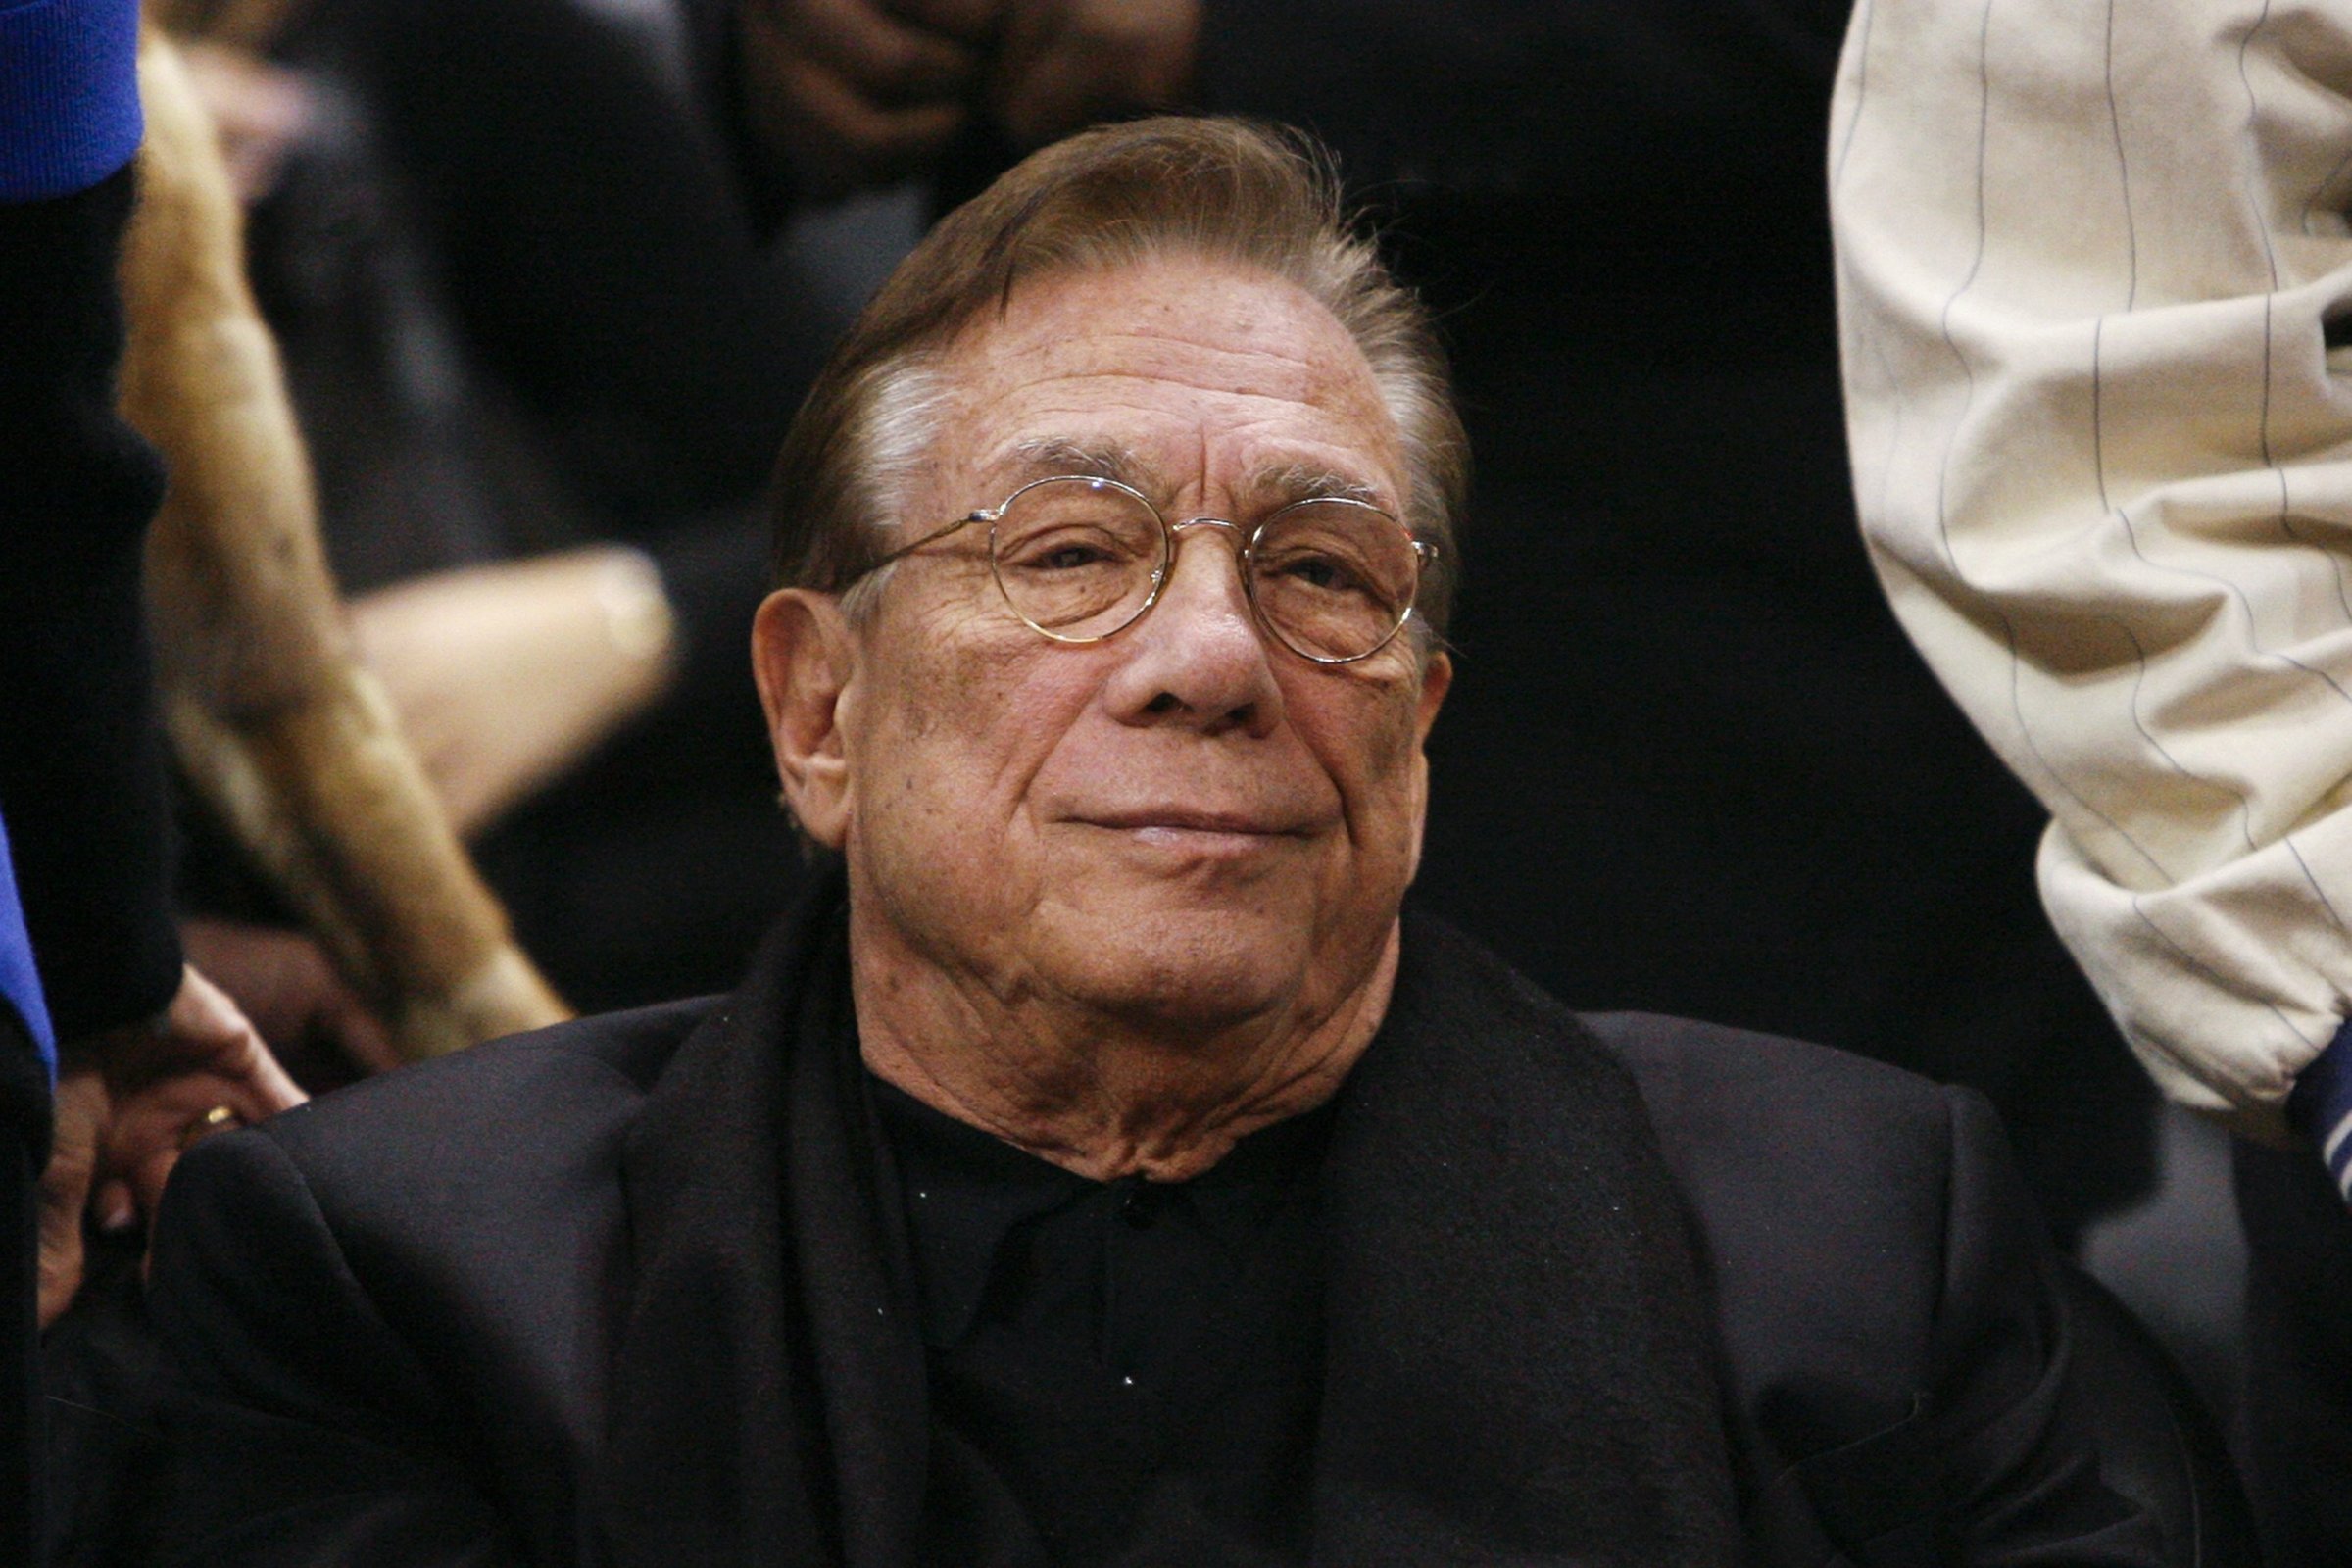 Los Angeles Clippers owner Donald Sterling attends the NBA basketball game between the Toronto Raptors and the Los Angeles Clippers at the Staples Center in Los Angeles, on Dec. 22, 2008.